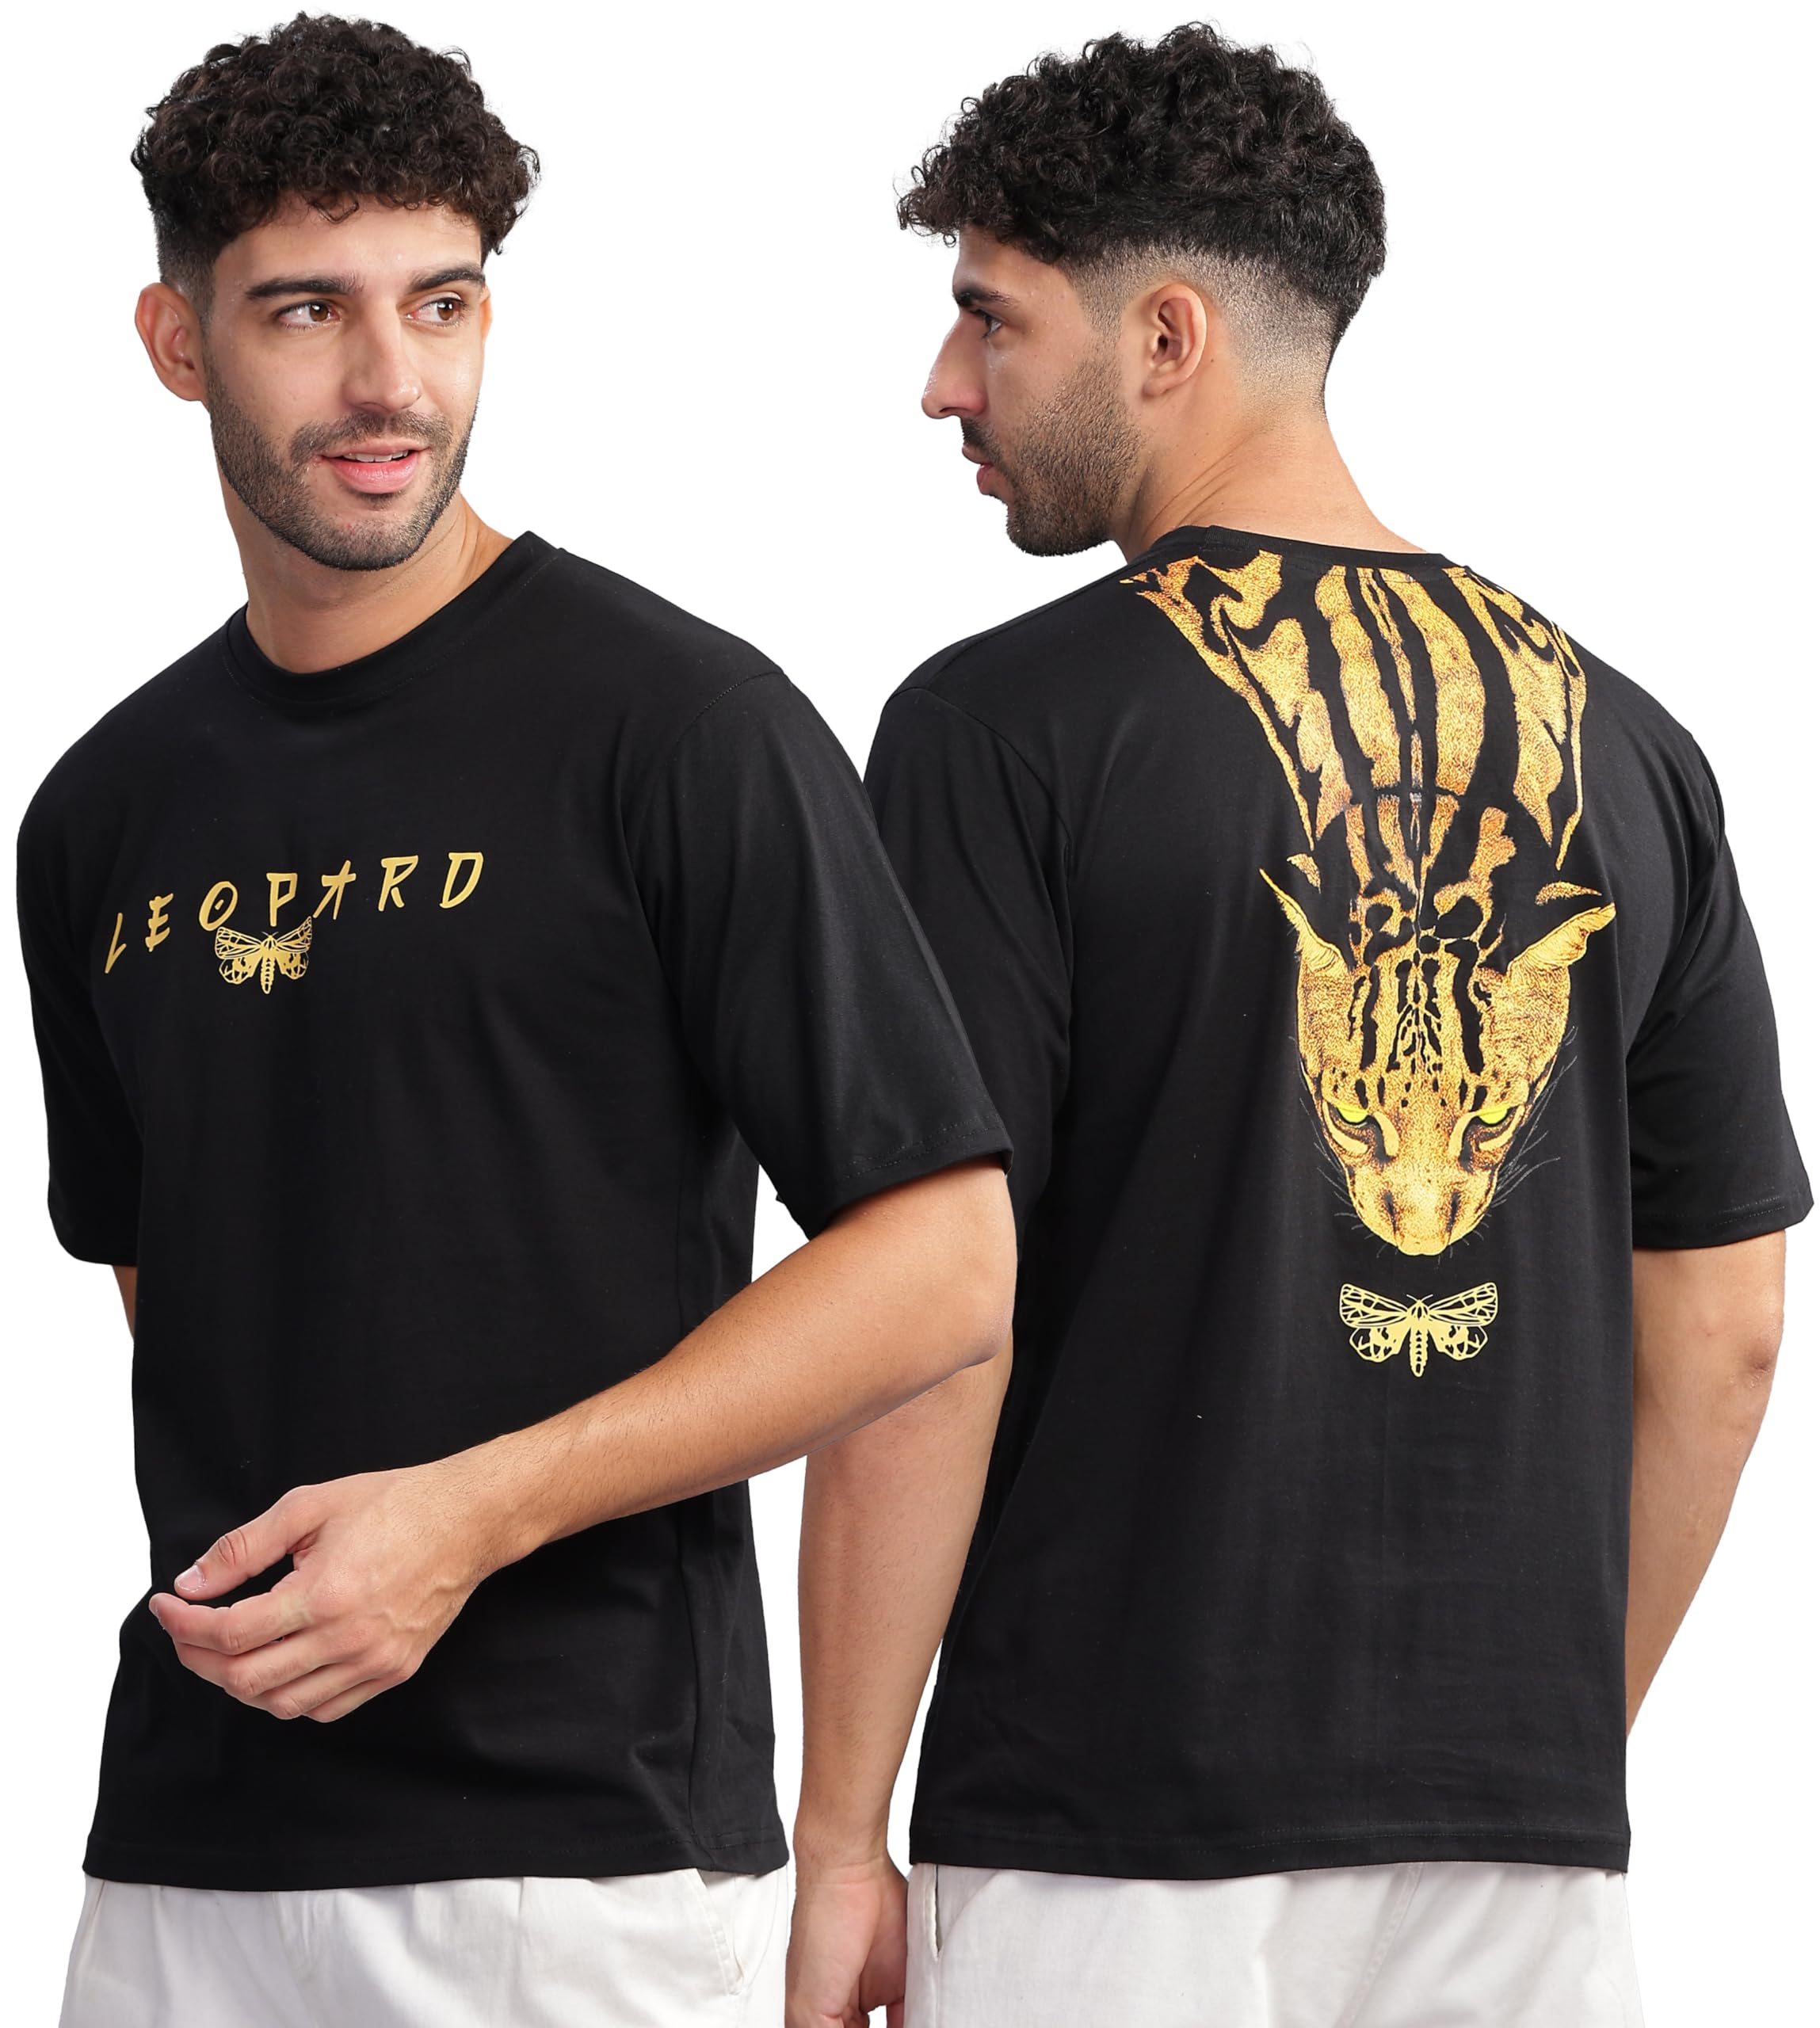 Kyda 100% Super Combed Cotton Relaxed fit Drop Shoulder Printed Men's Black Tshirt - (Not Too Loose, Not Too Tight)